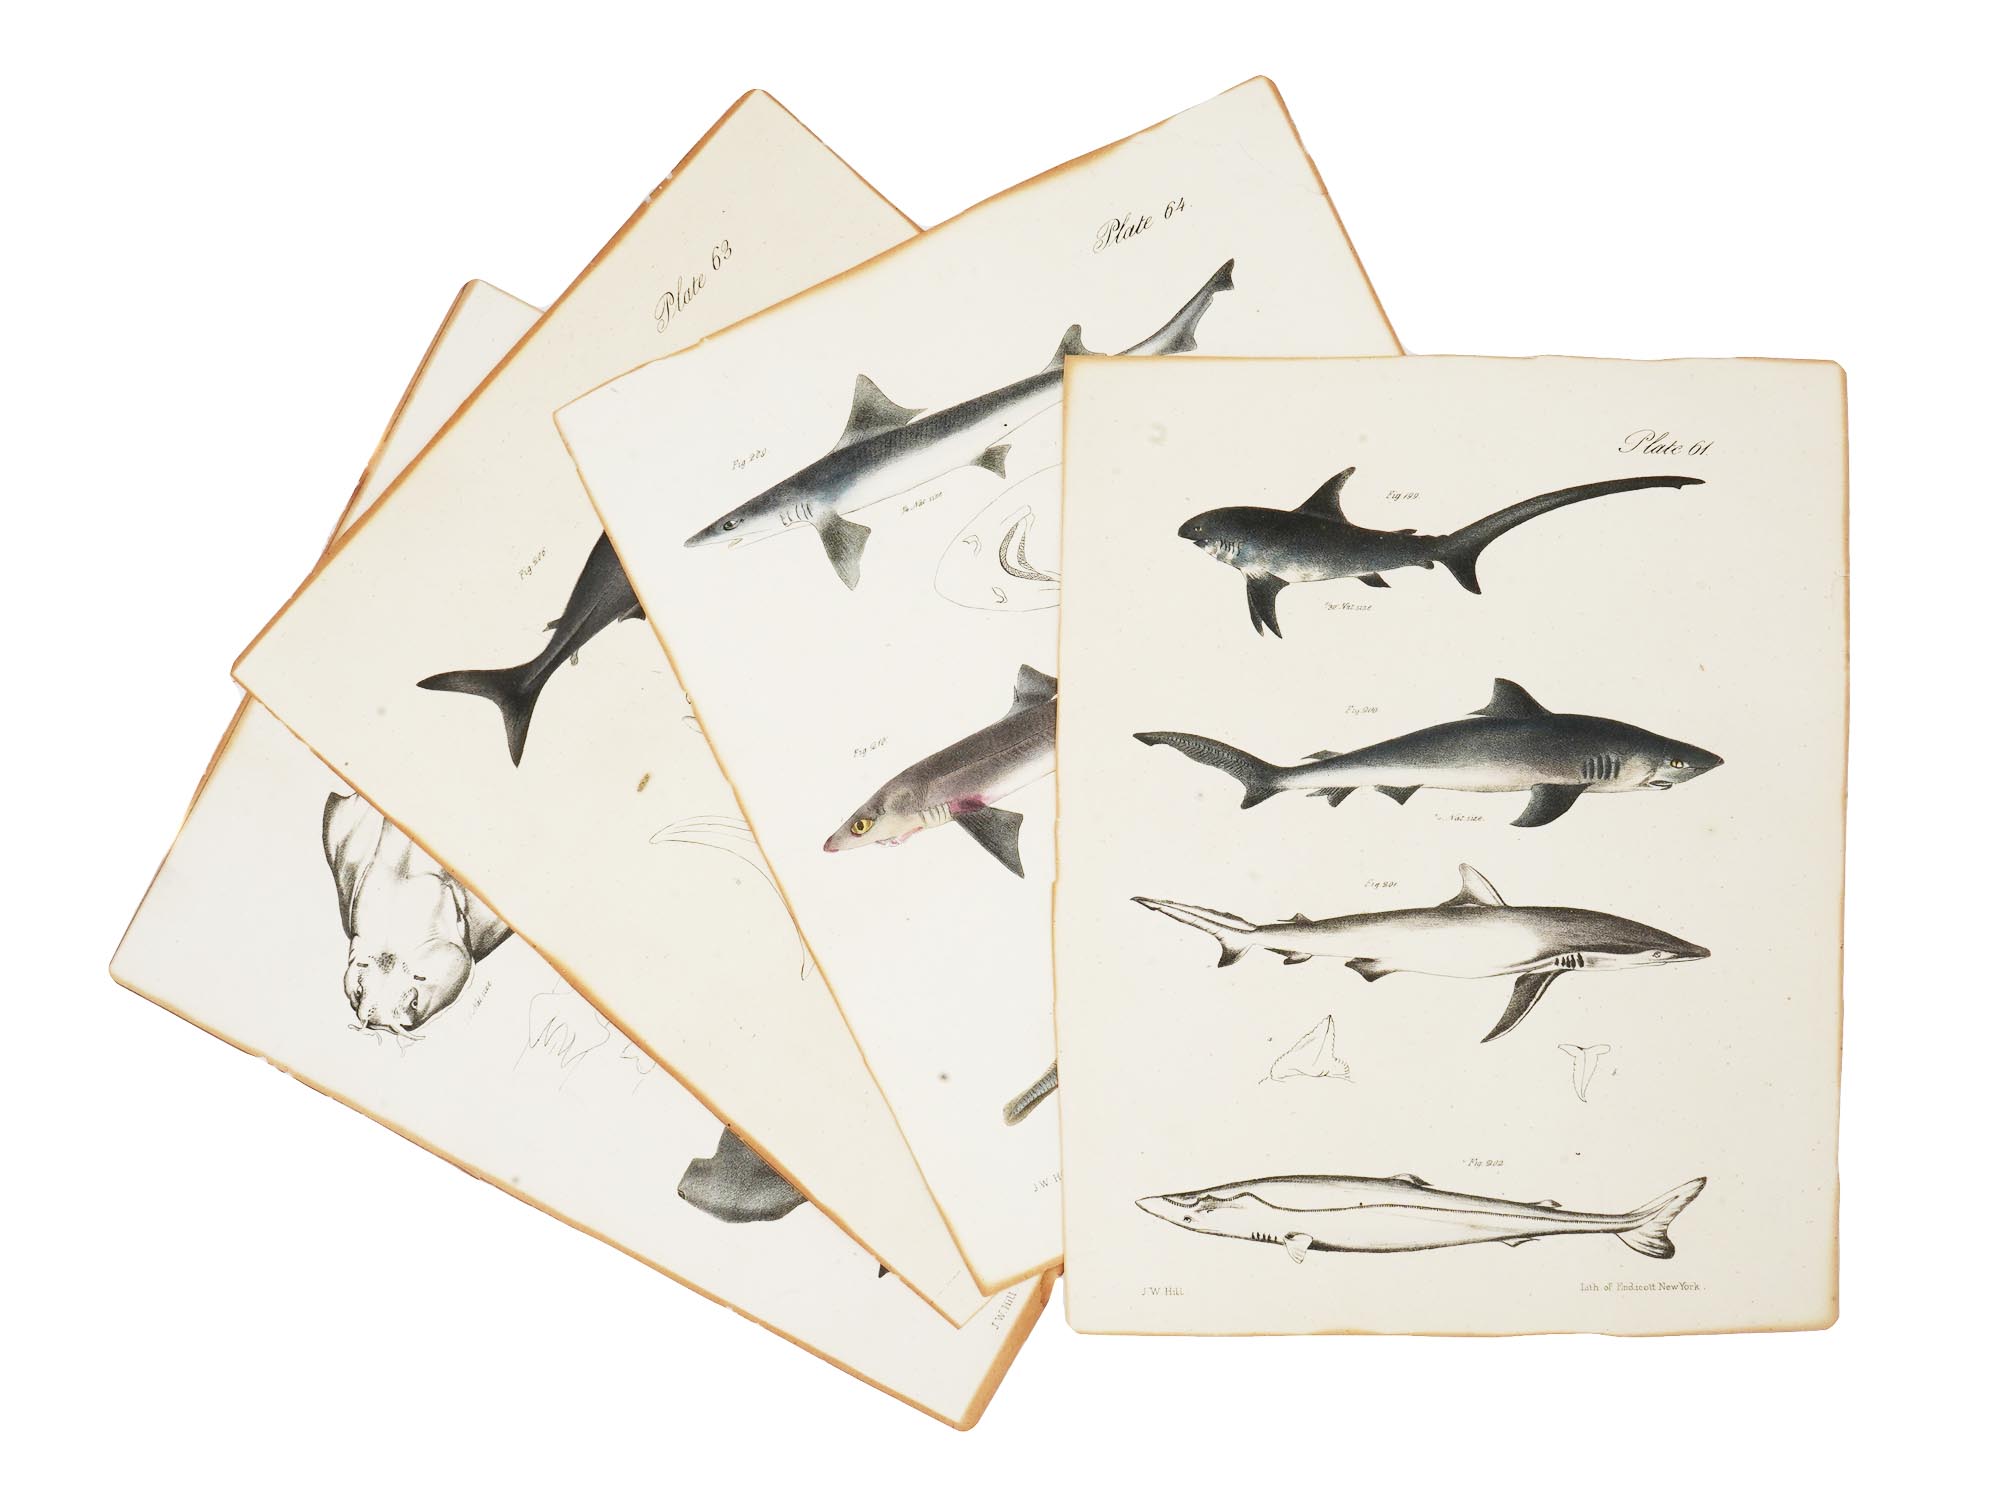 GROUP OF NEW YORK ZOOLOGY FAUNA SHARK ENGRAVINGS PIC-1